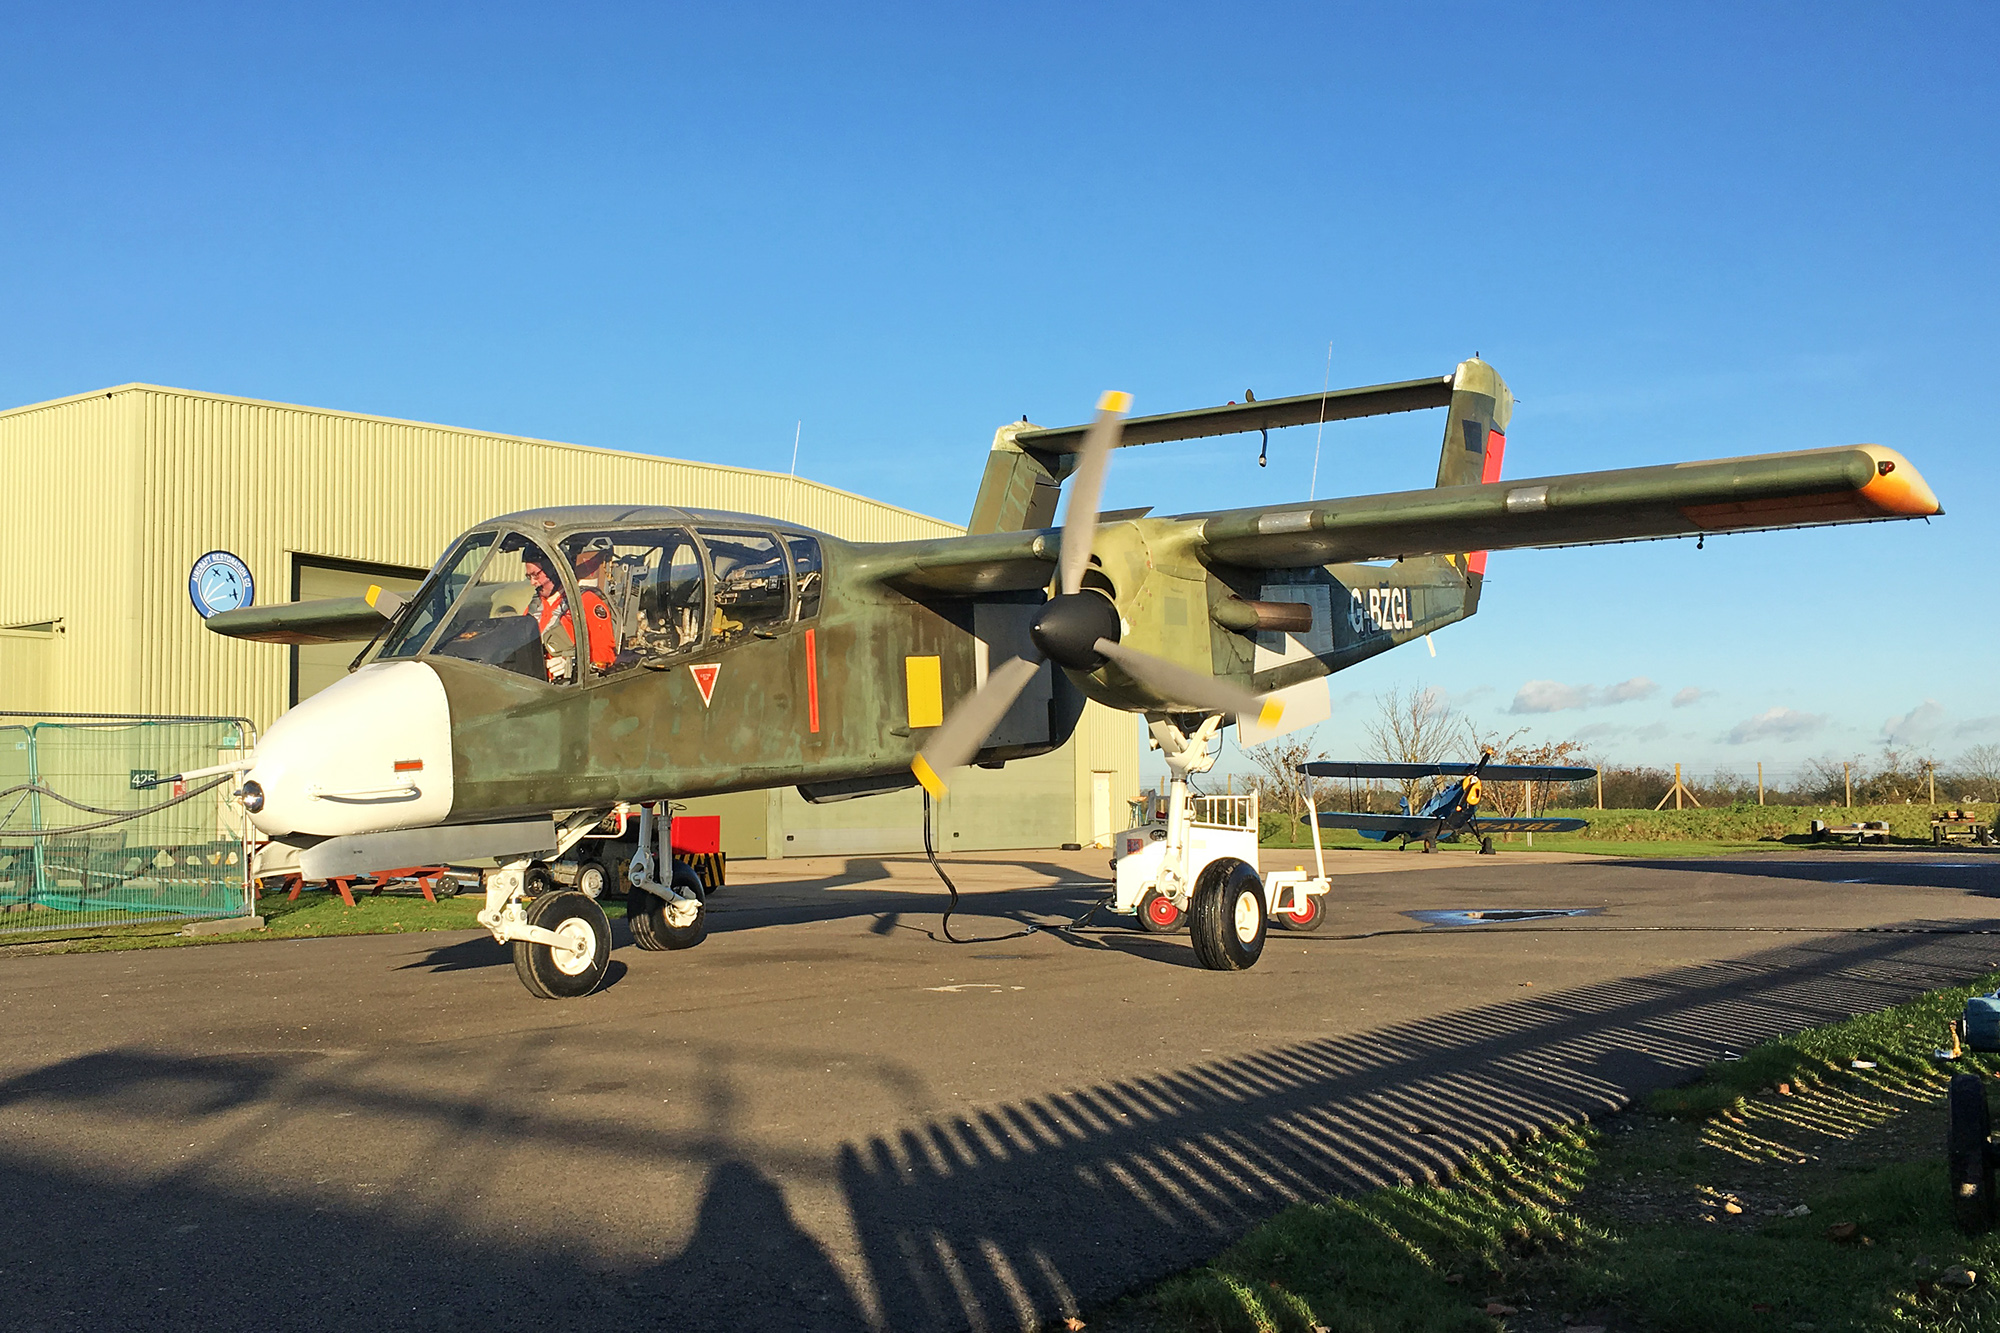 The first post-restoration flight of OV-10B 99+26 which took place last Wednesday at Duxford. (Photograph by Jessie De Cooman)